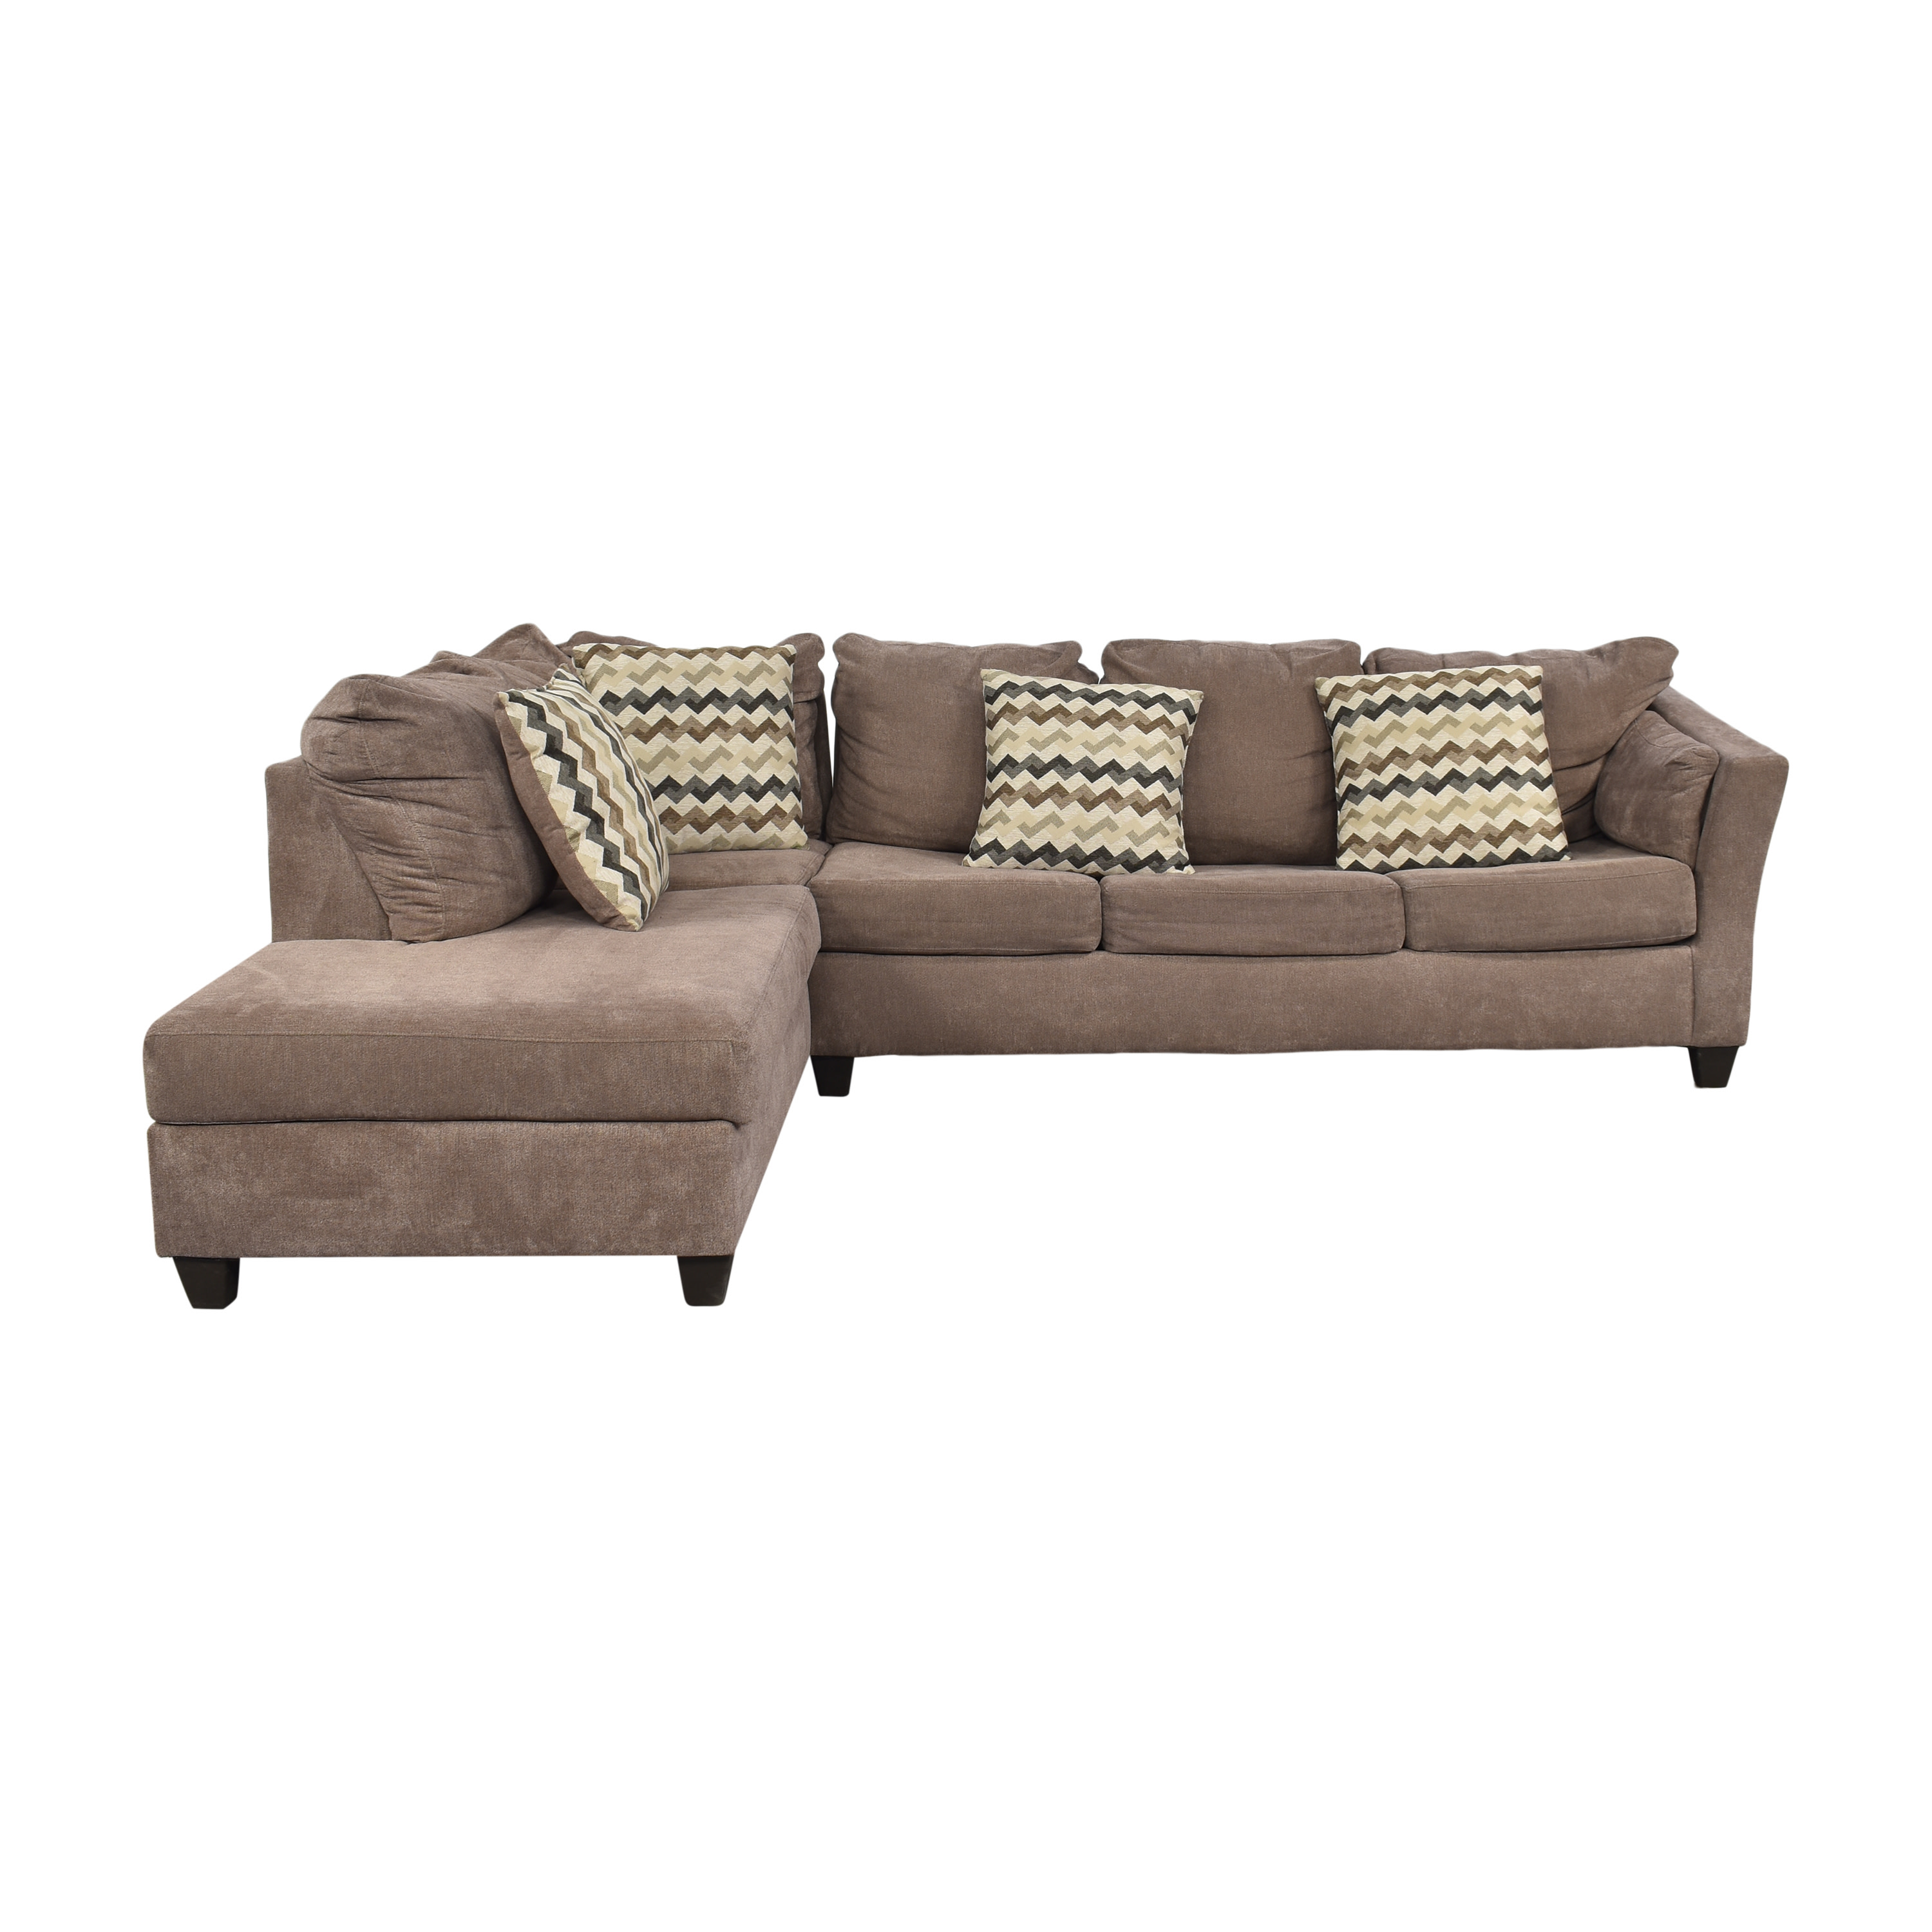 Bob's Discount Furniture Virgo Two Piece Chaise Sleeper Sectional